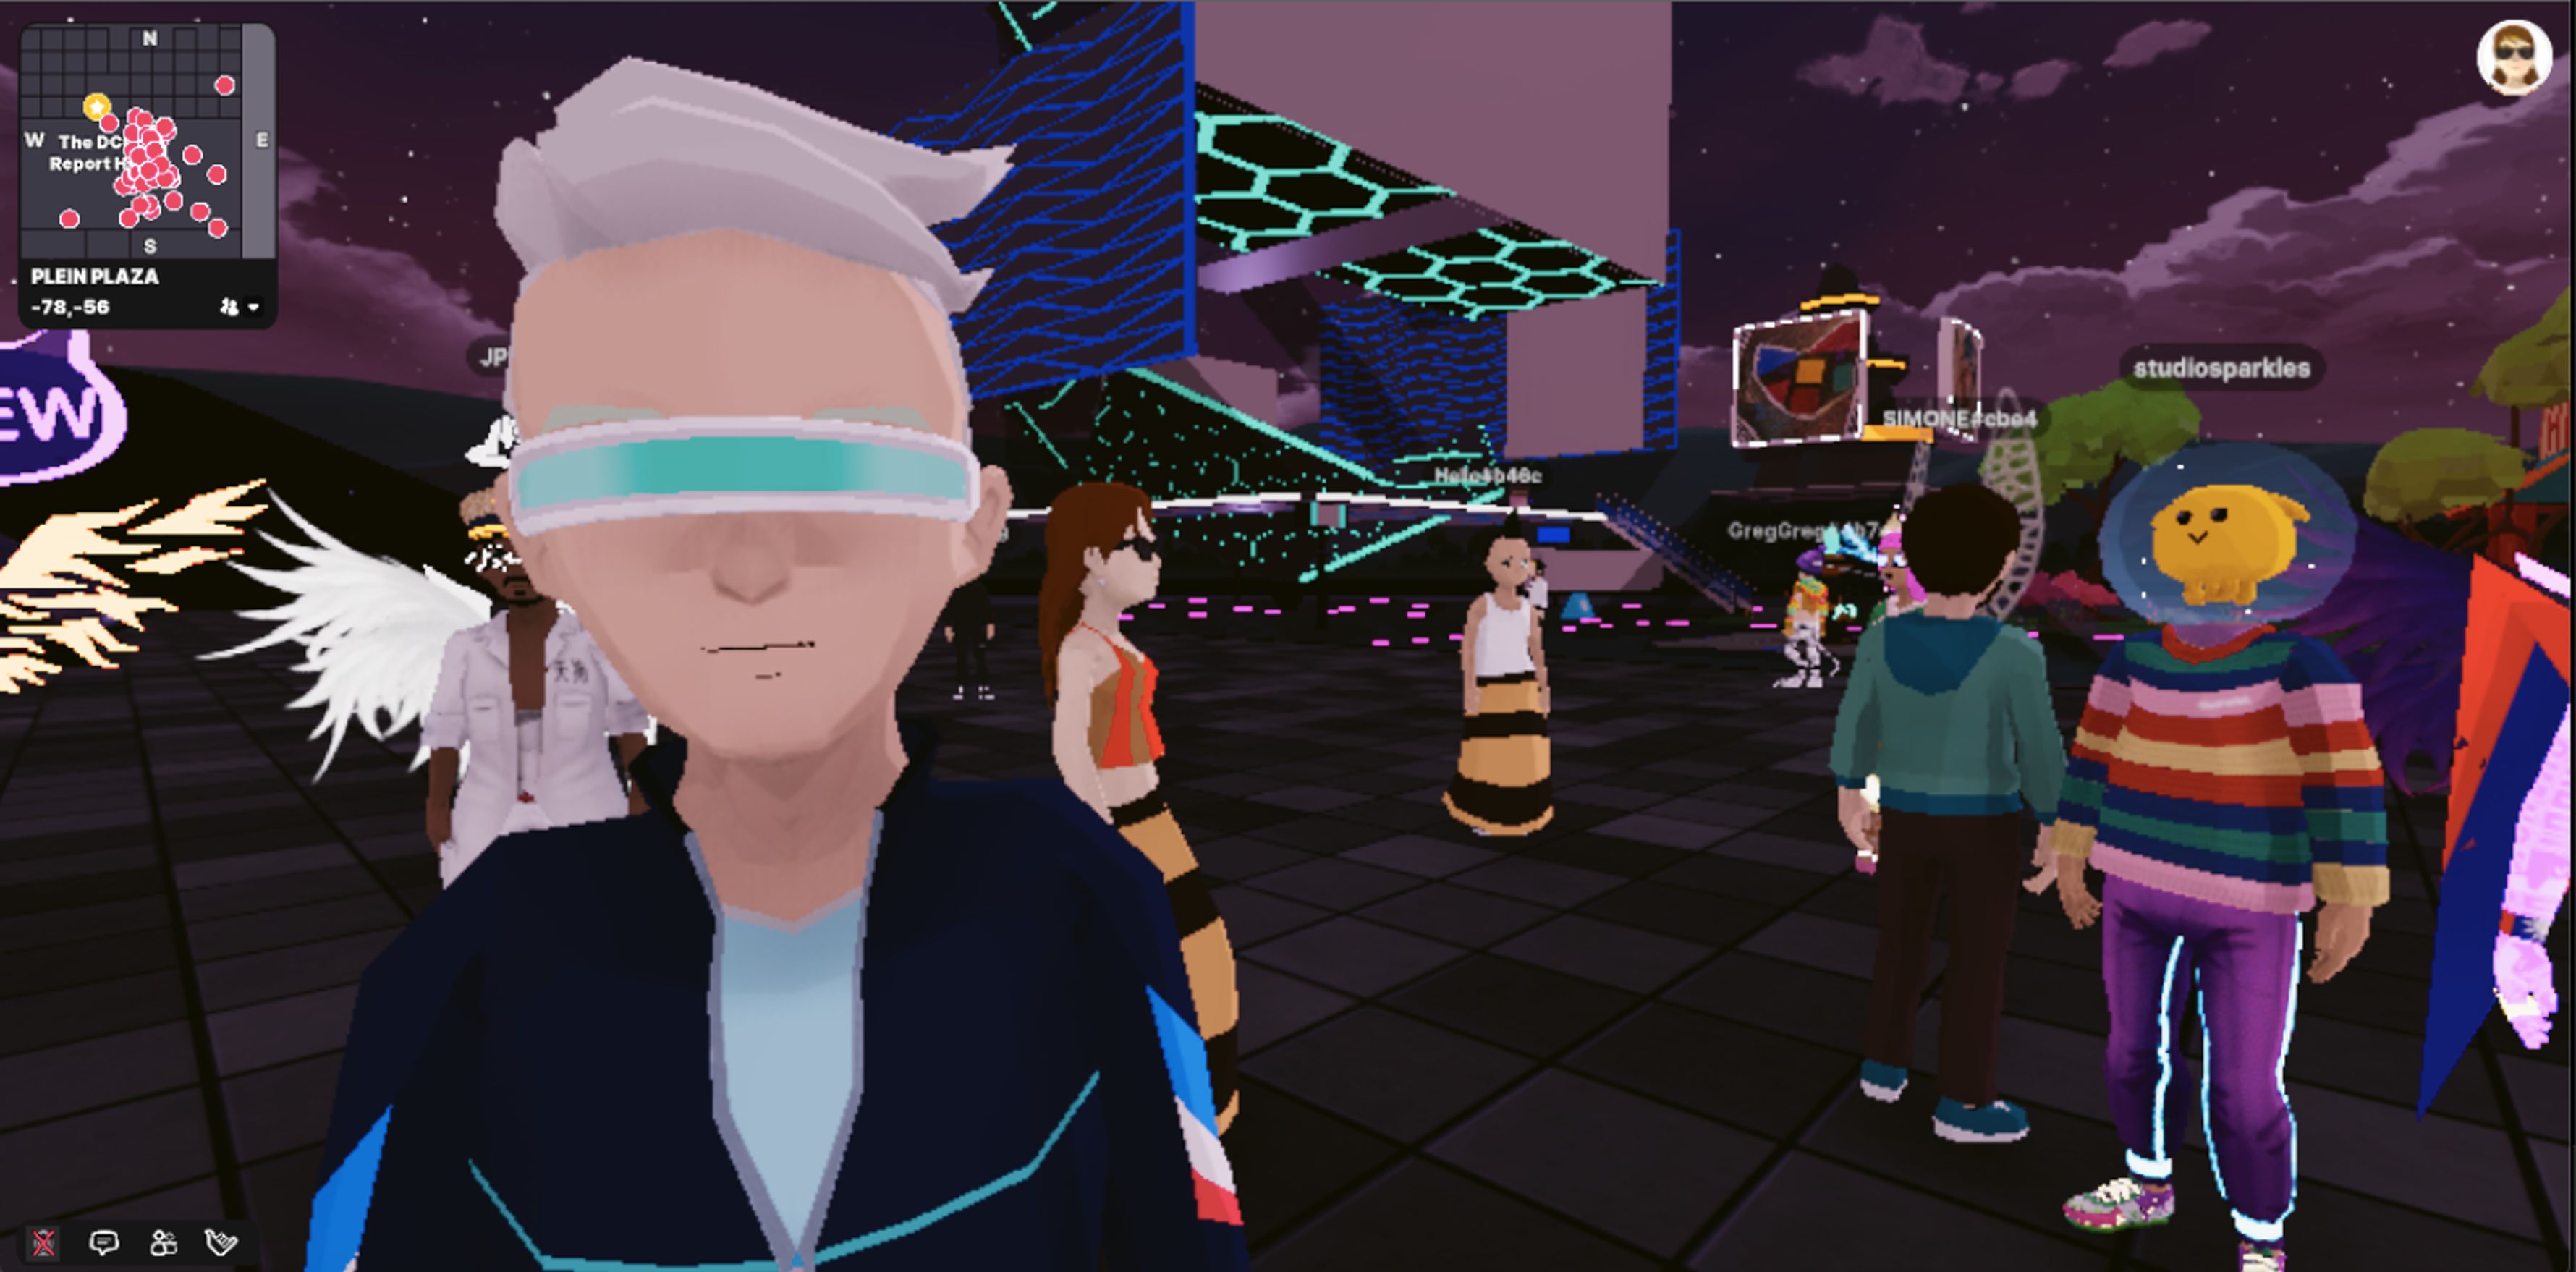 Tommy Hilfiger to Participate in Decentraland Metaverse Fashion